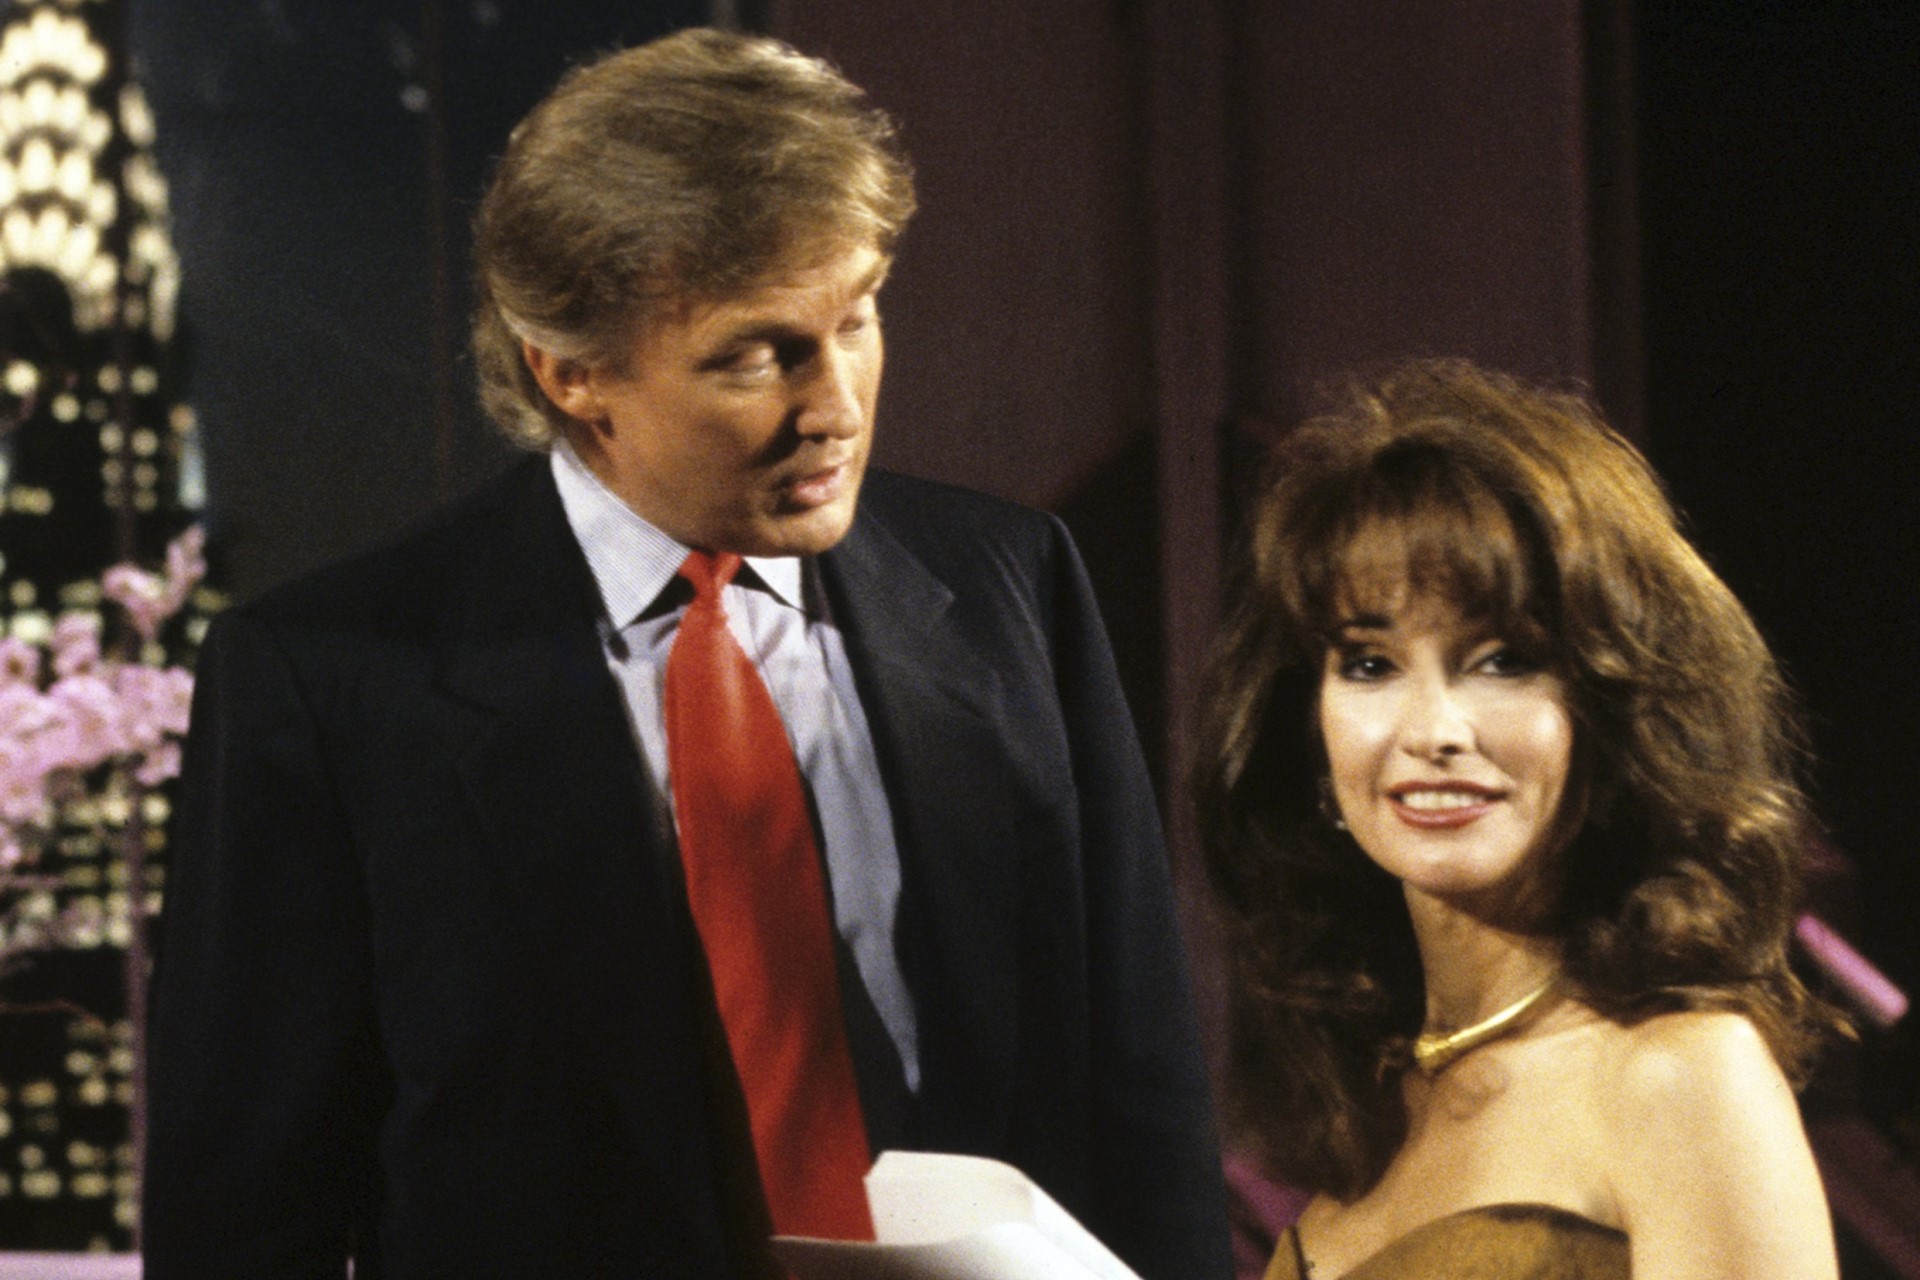 Gems from Donald Trump's TV and movie career